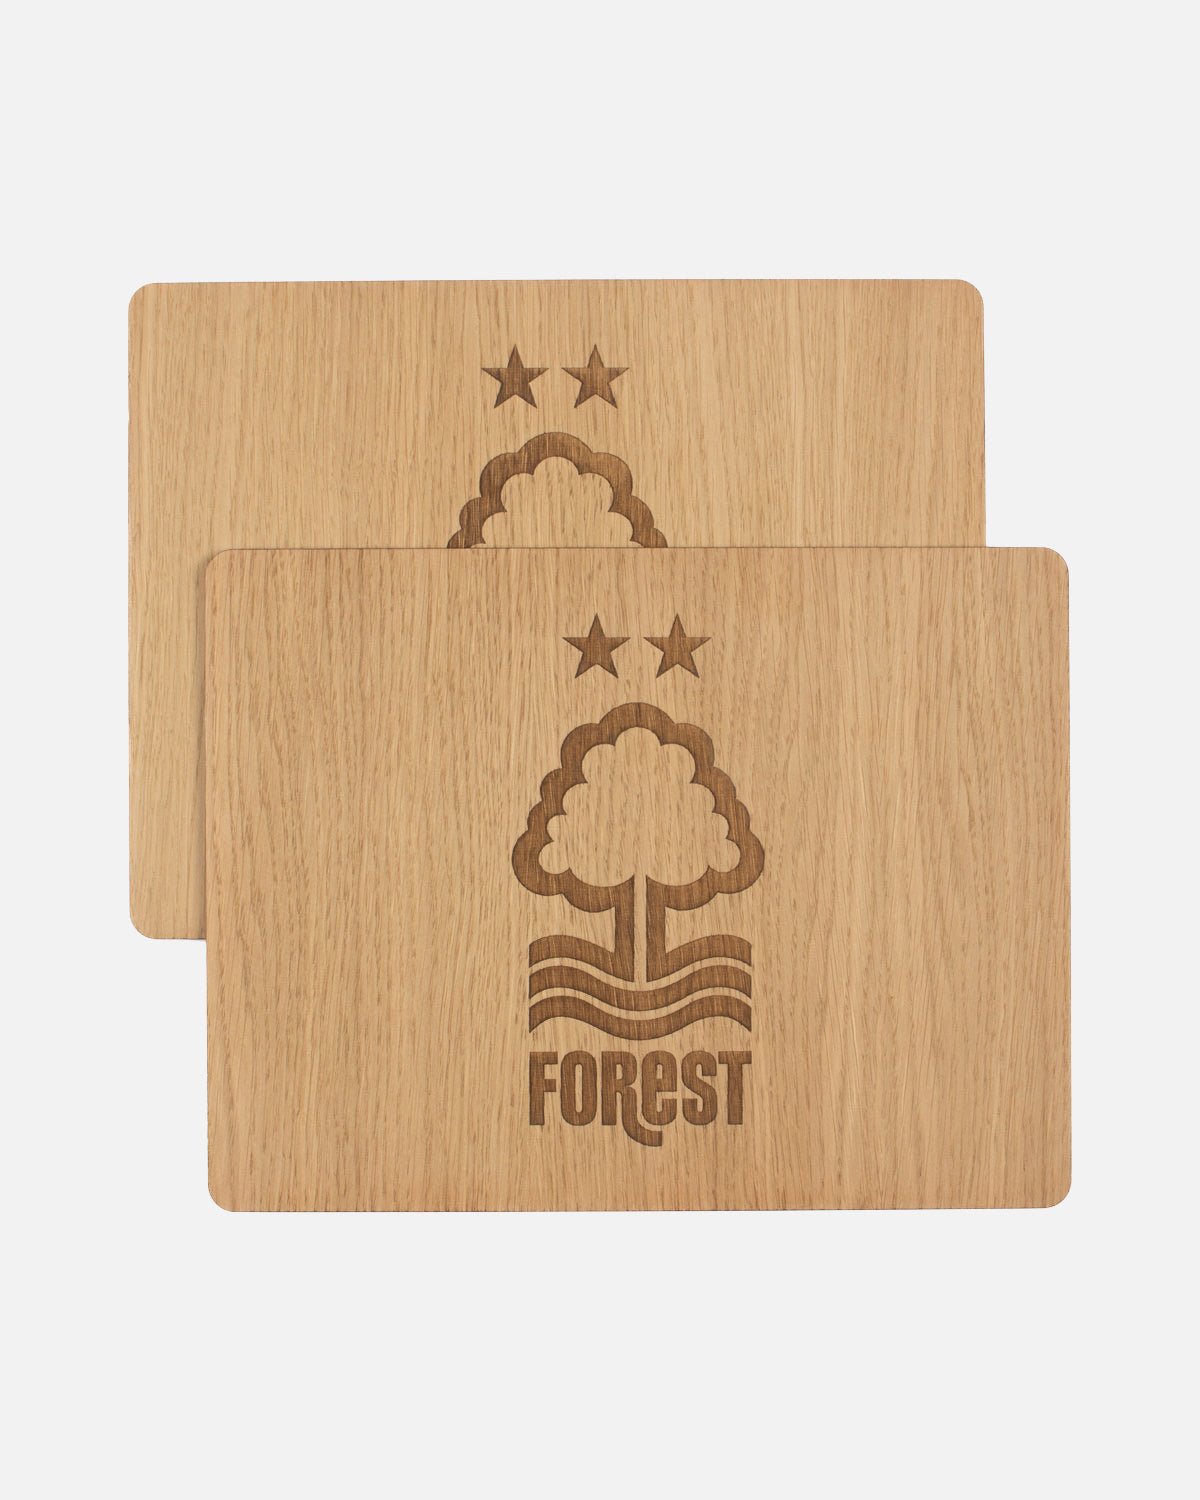 NFFC Engraved Place Mats - Nottingham Forest FC